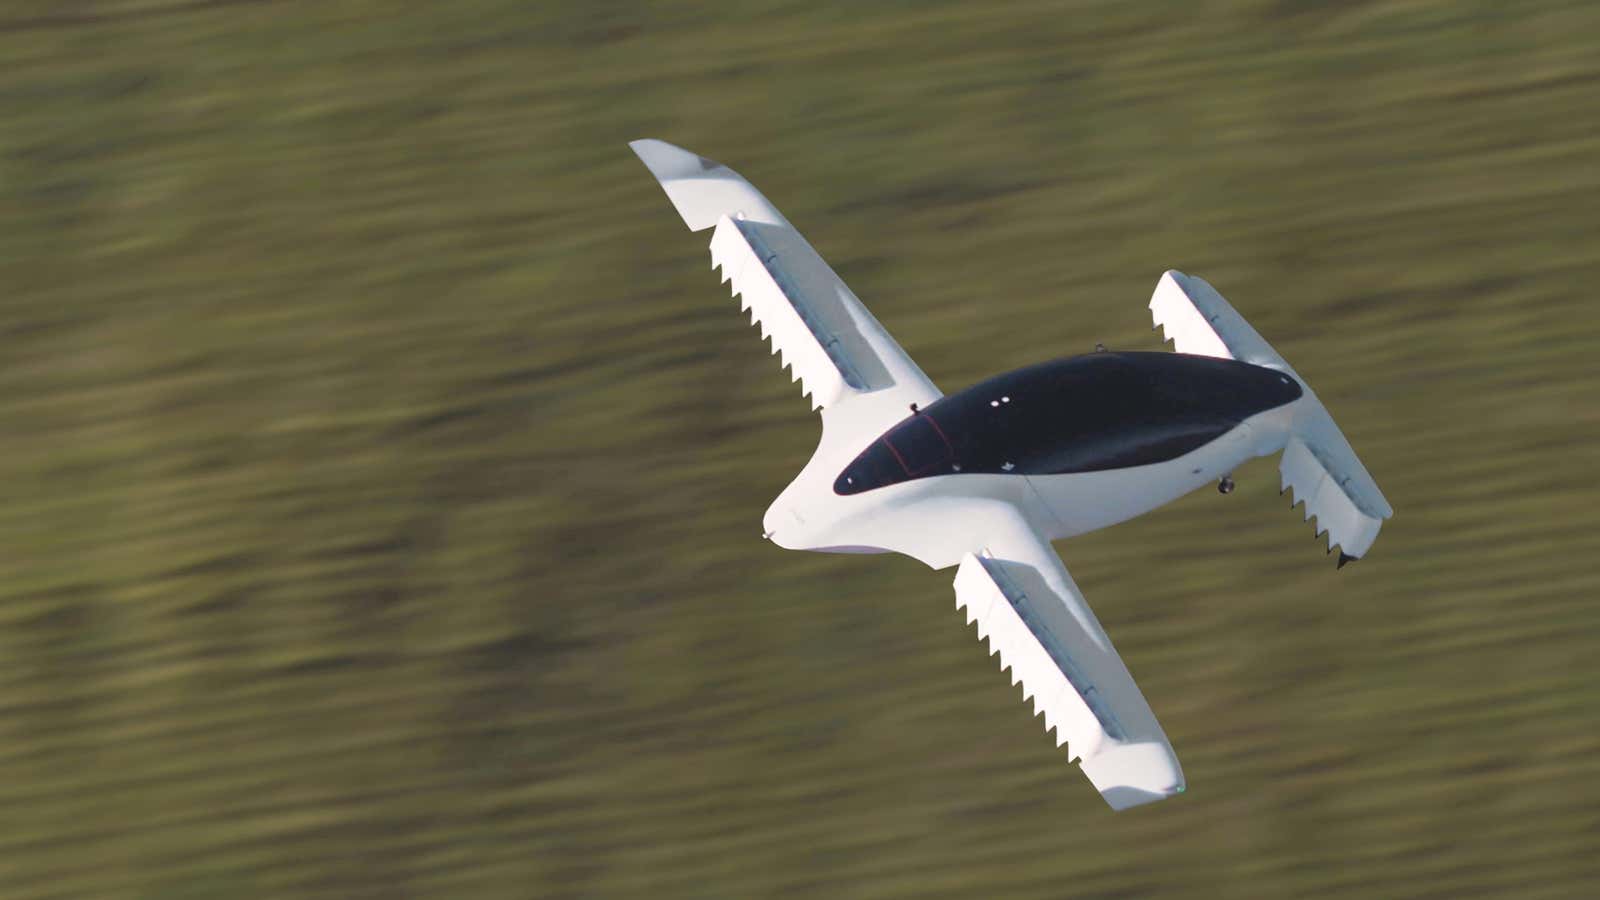 A flying taxi startup. Hey, why not?